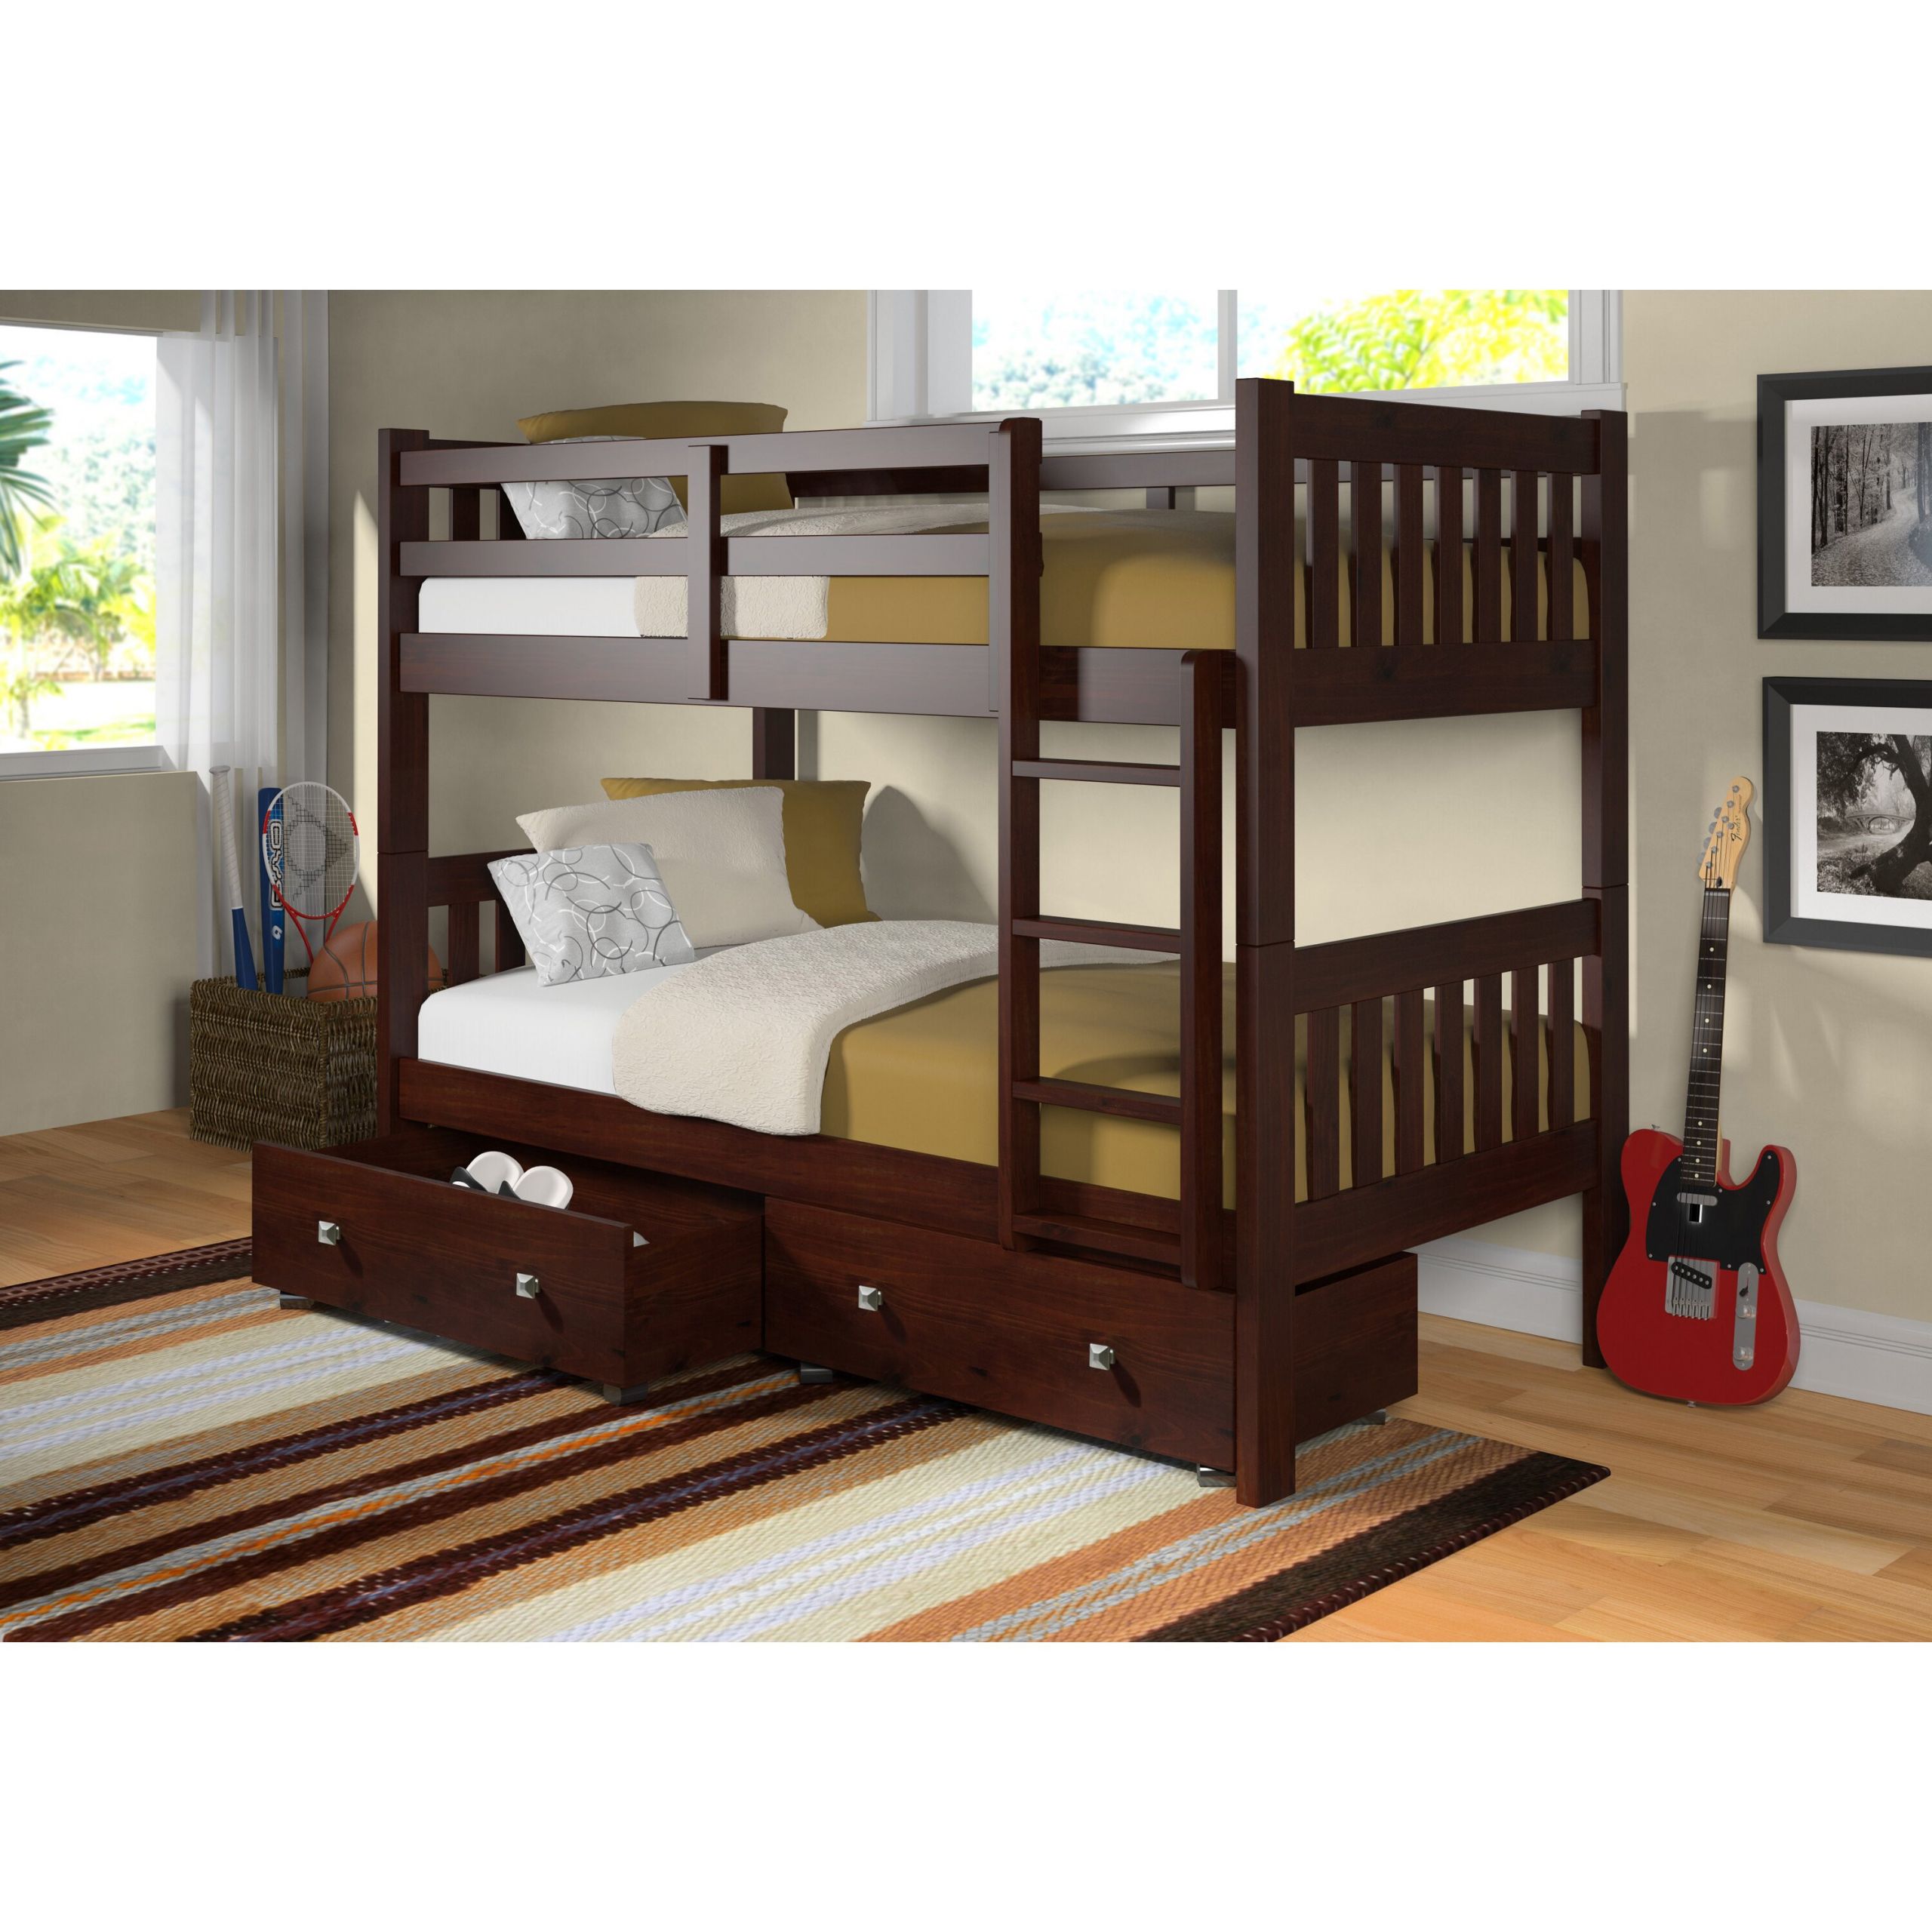 Childrens Bunk Bed With Storage
 Twin Bunk Bed with Storage